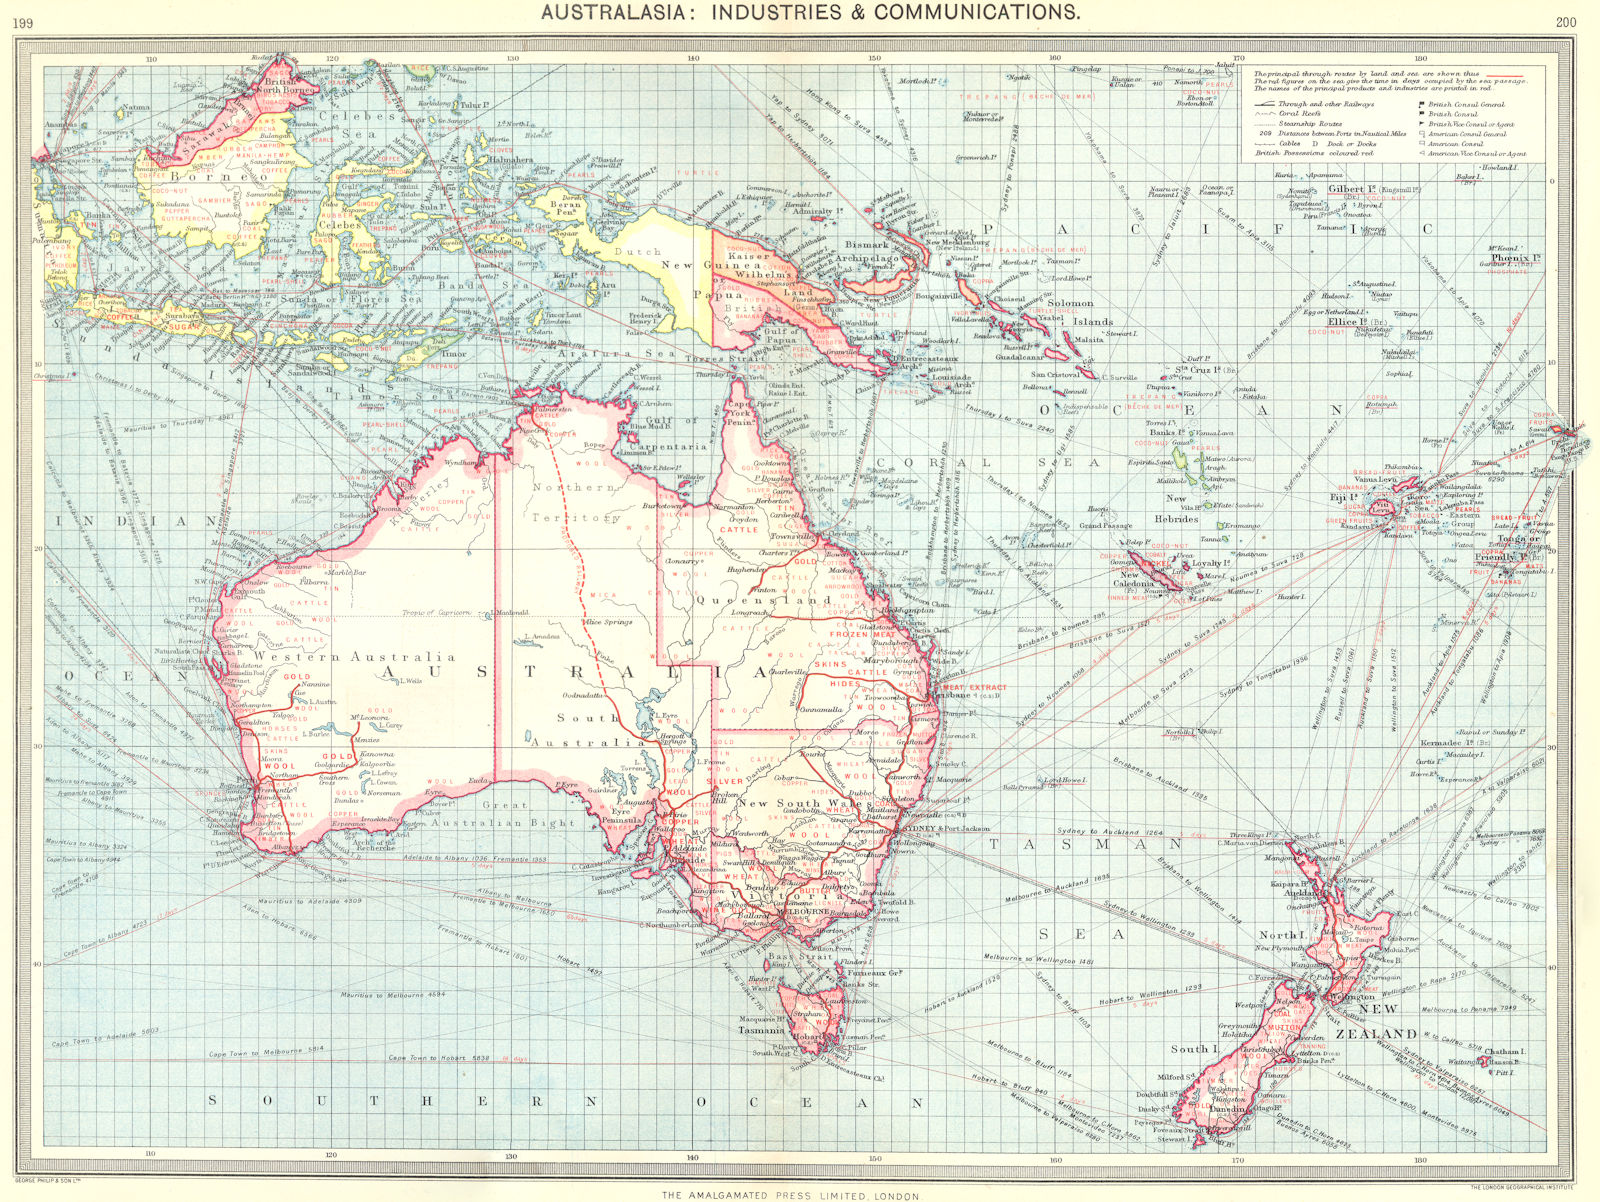 AUSTRALASIA. Australia. Industries and Communications 1907 old antique map